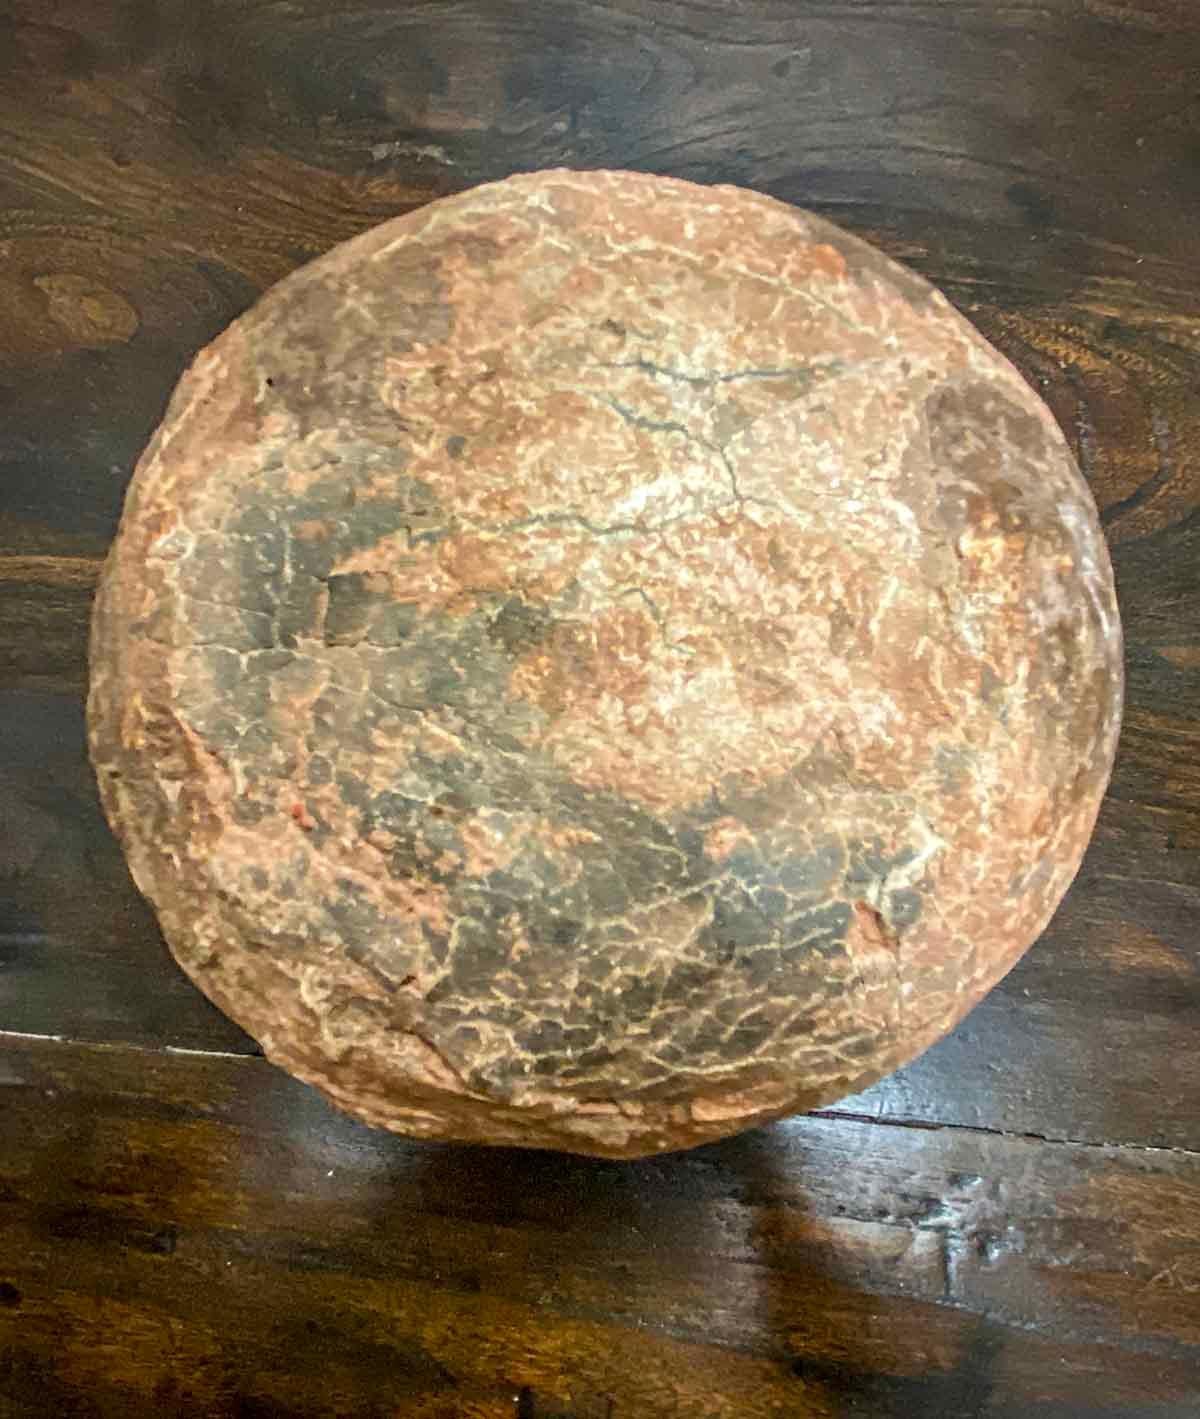 Other Prehistoric Chinese Petrified Dinosaur Egg with Cracked Surface